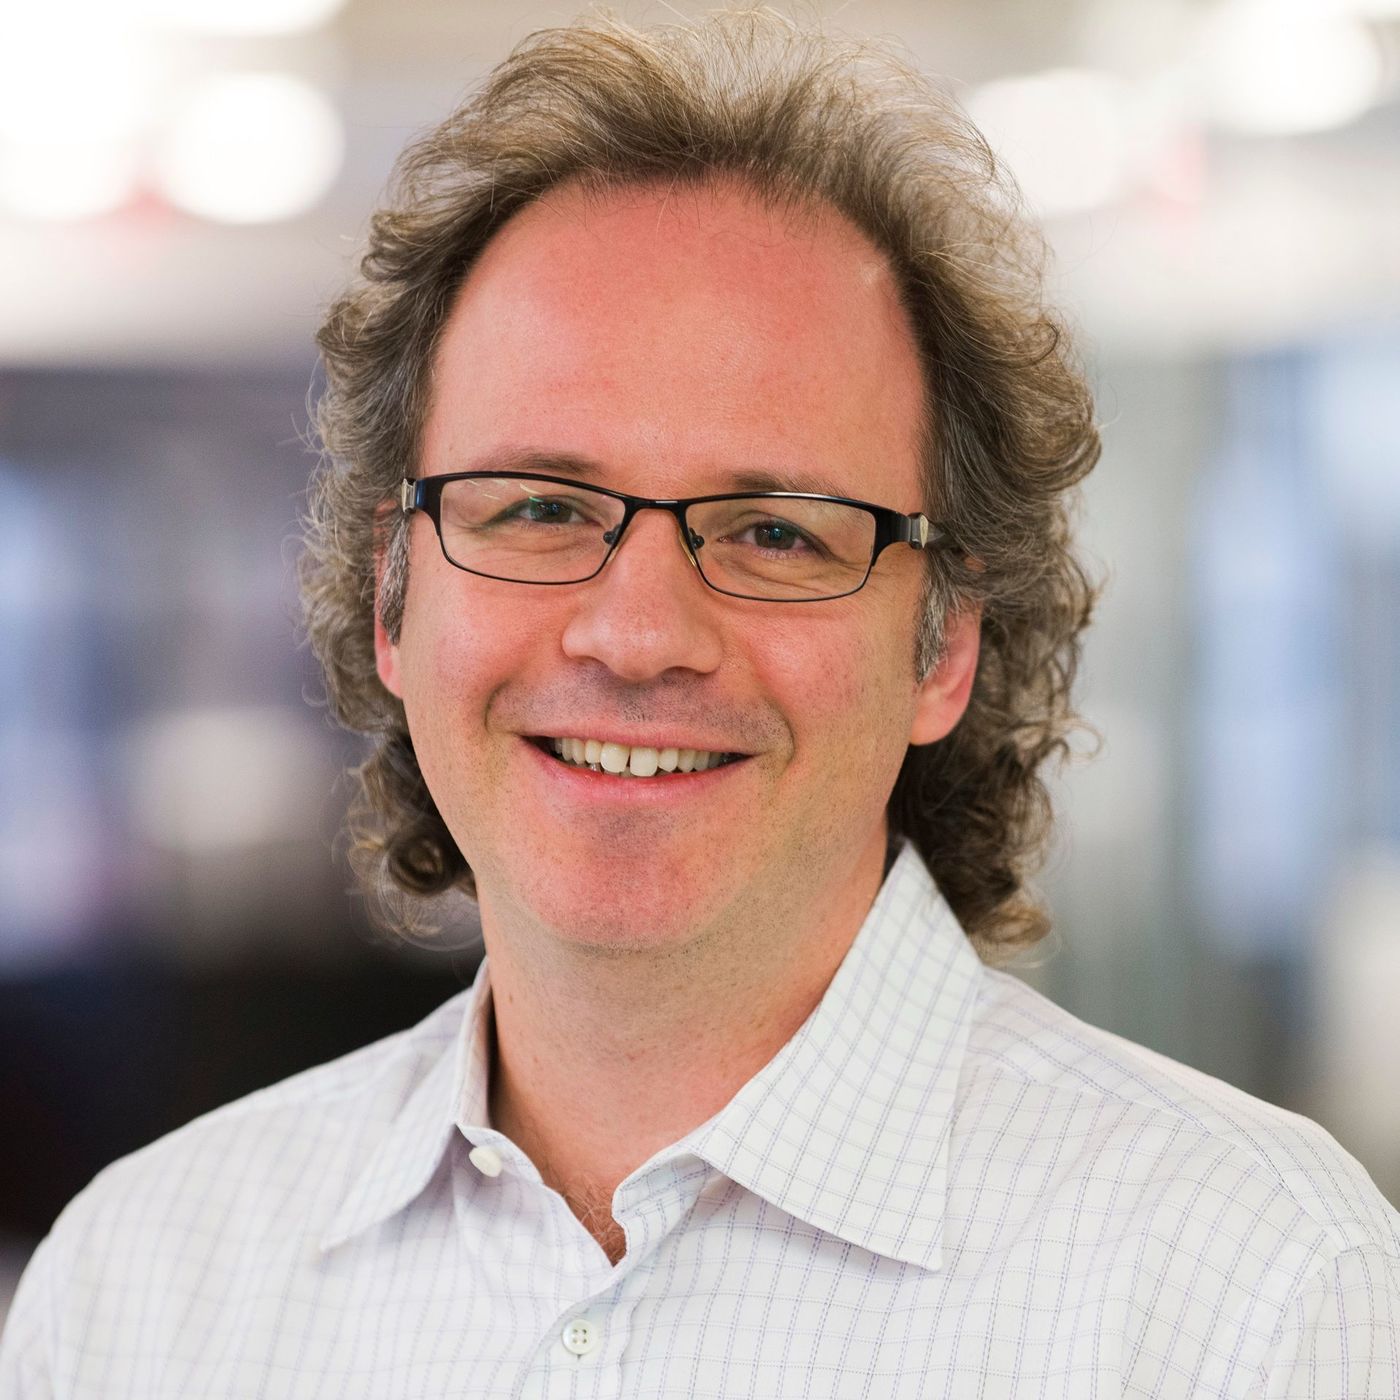 An Interview With Dr. Michael Geist, Law Professor At The University Of Ottawa